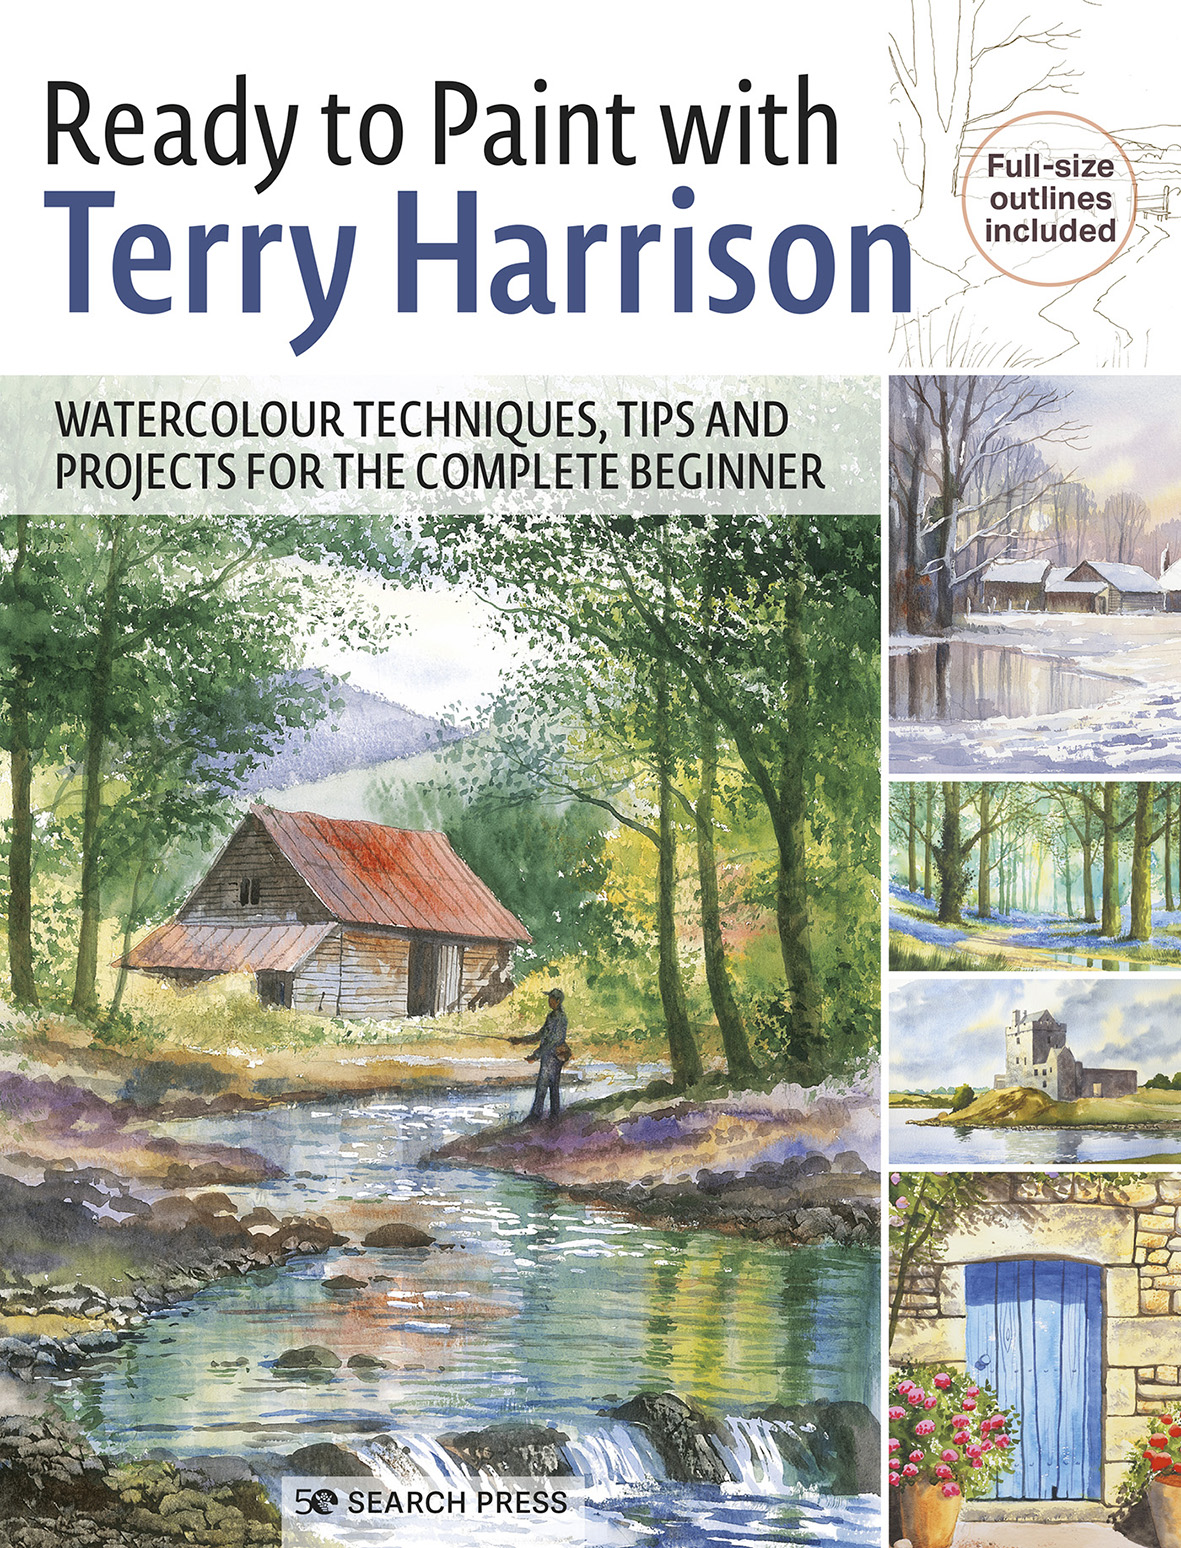 Ready to Paint with Terry Harrison